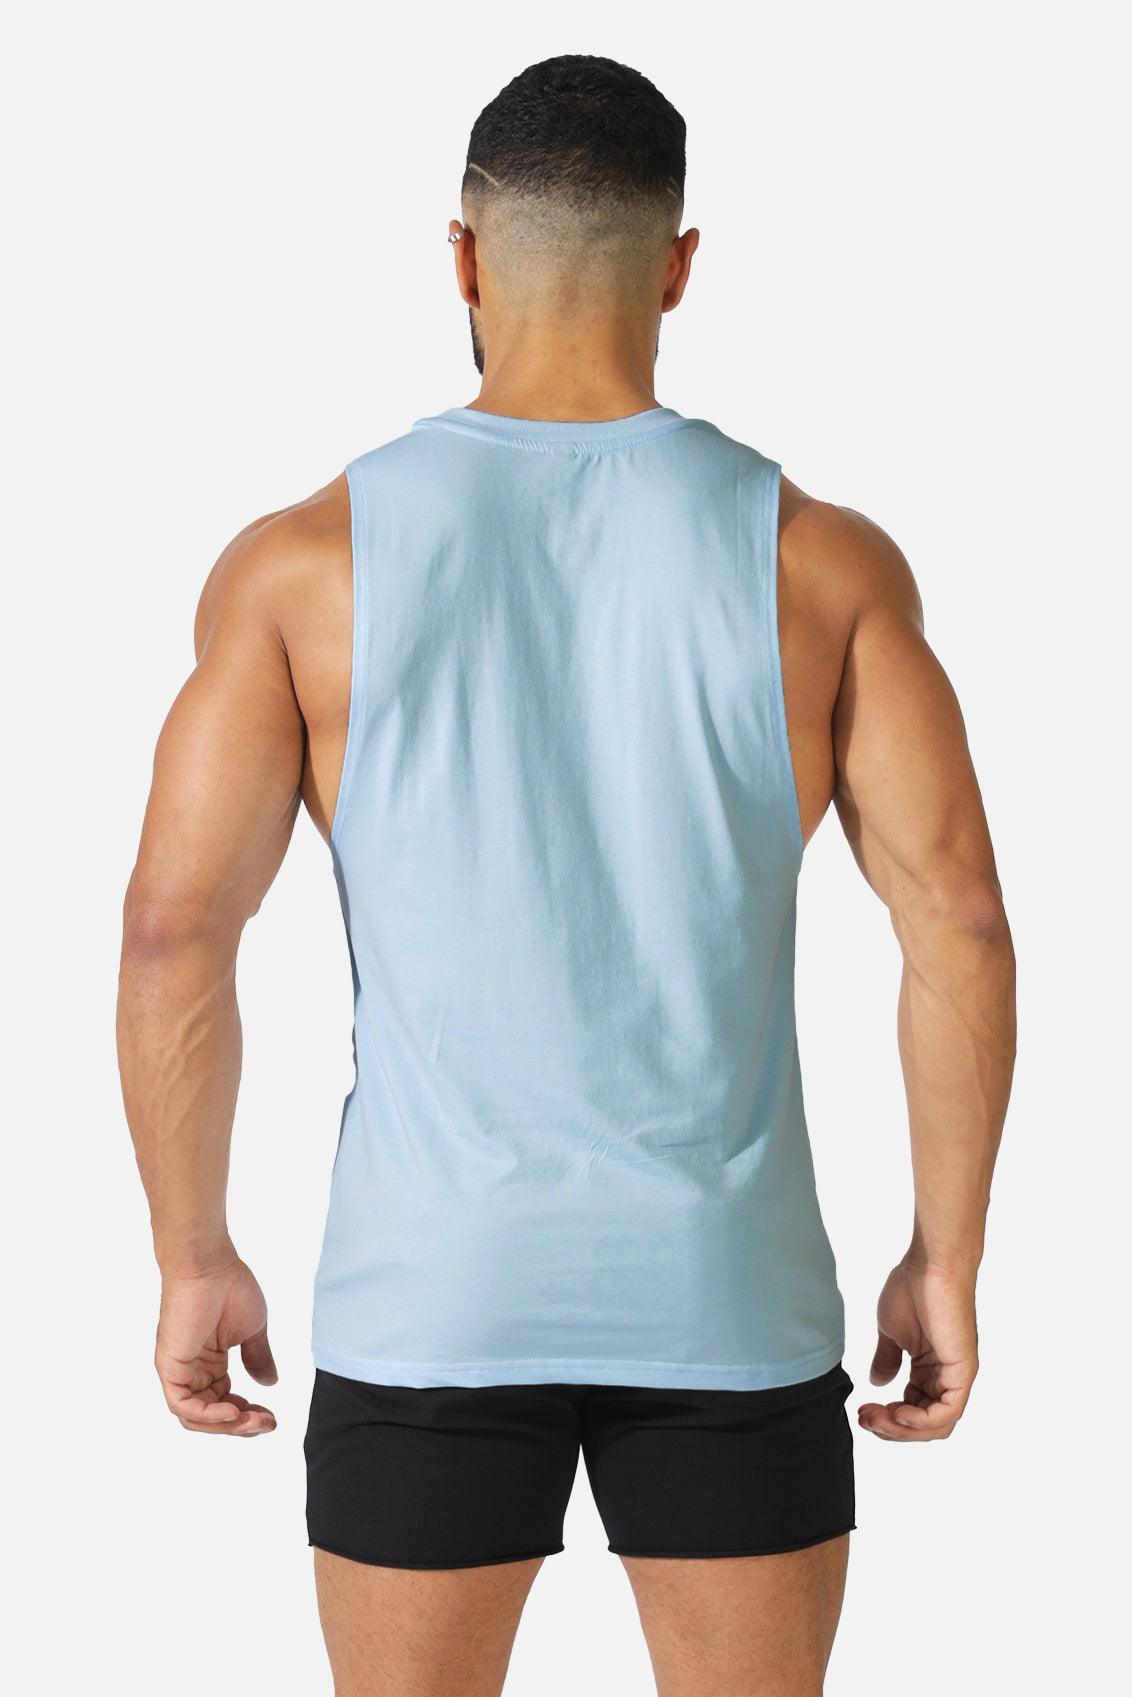 Workout Muscle Tee - Lift